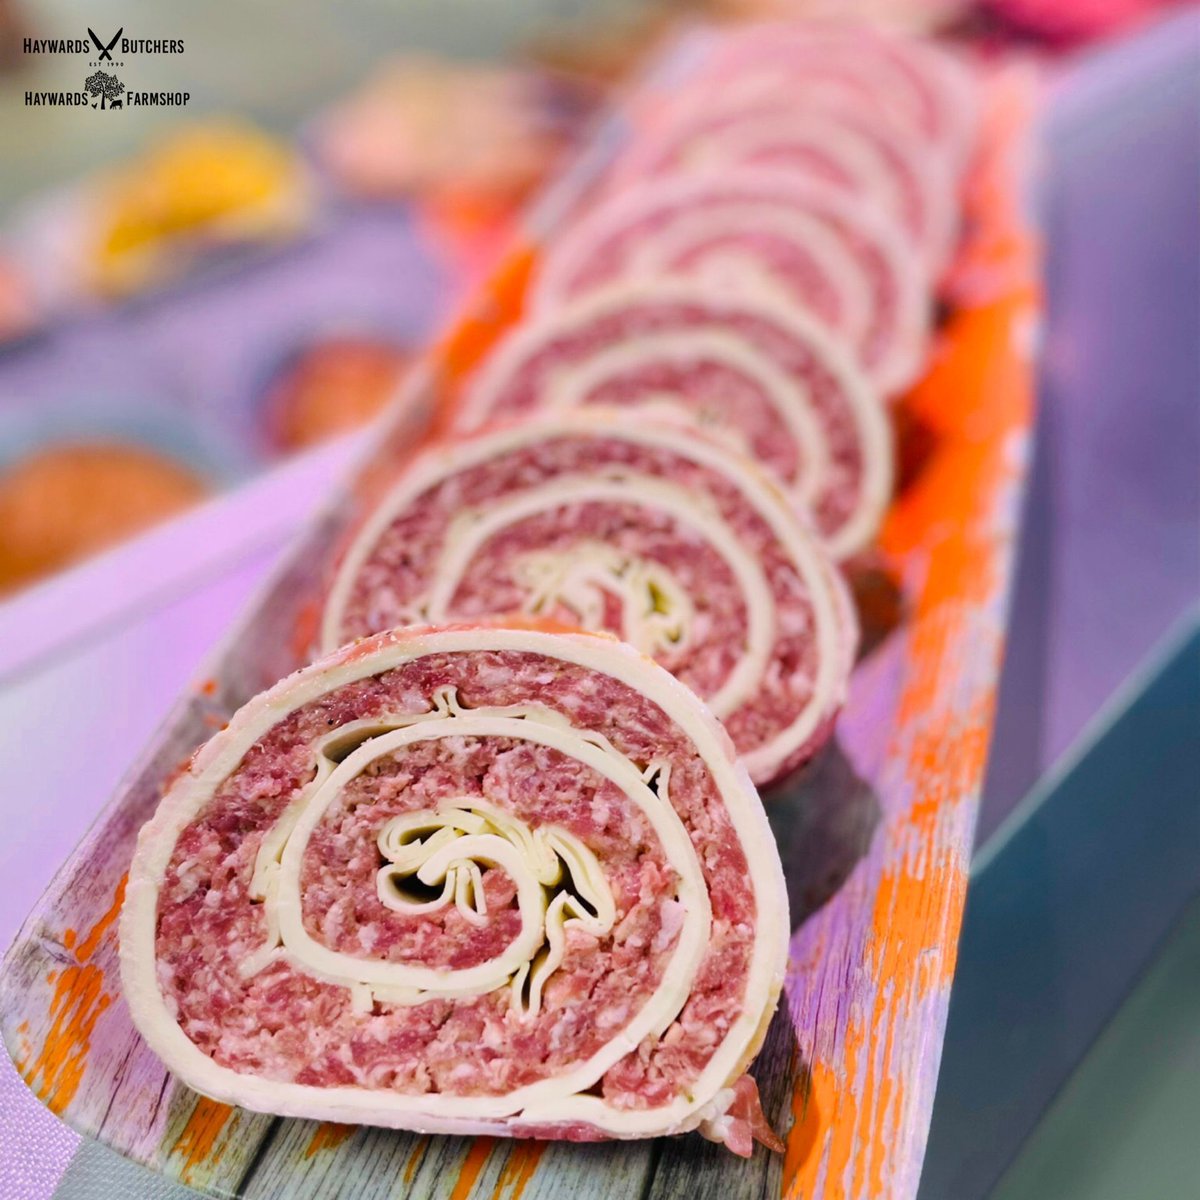 Get ready for a flavour explosion with our Cumberland Swirls! 🧀🥓 Indulge in the irresistible combination of Cumberland sausagemeat & mozzarella, all wrapped up in puff pastry & streaky bacon #CumberlandSwirls #FlavourExplosion #ButchersChoice #ShopLocal #Tonbridge #Haywards1990